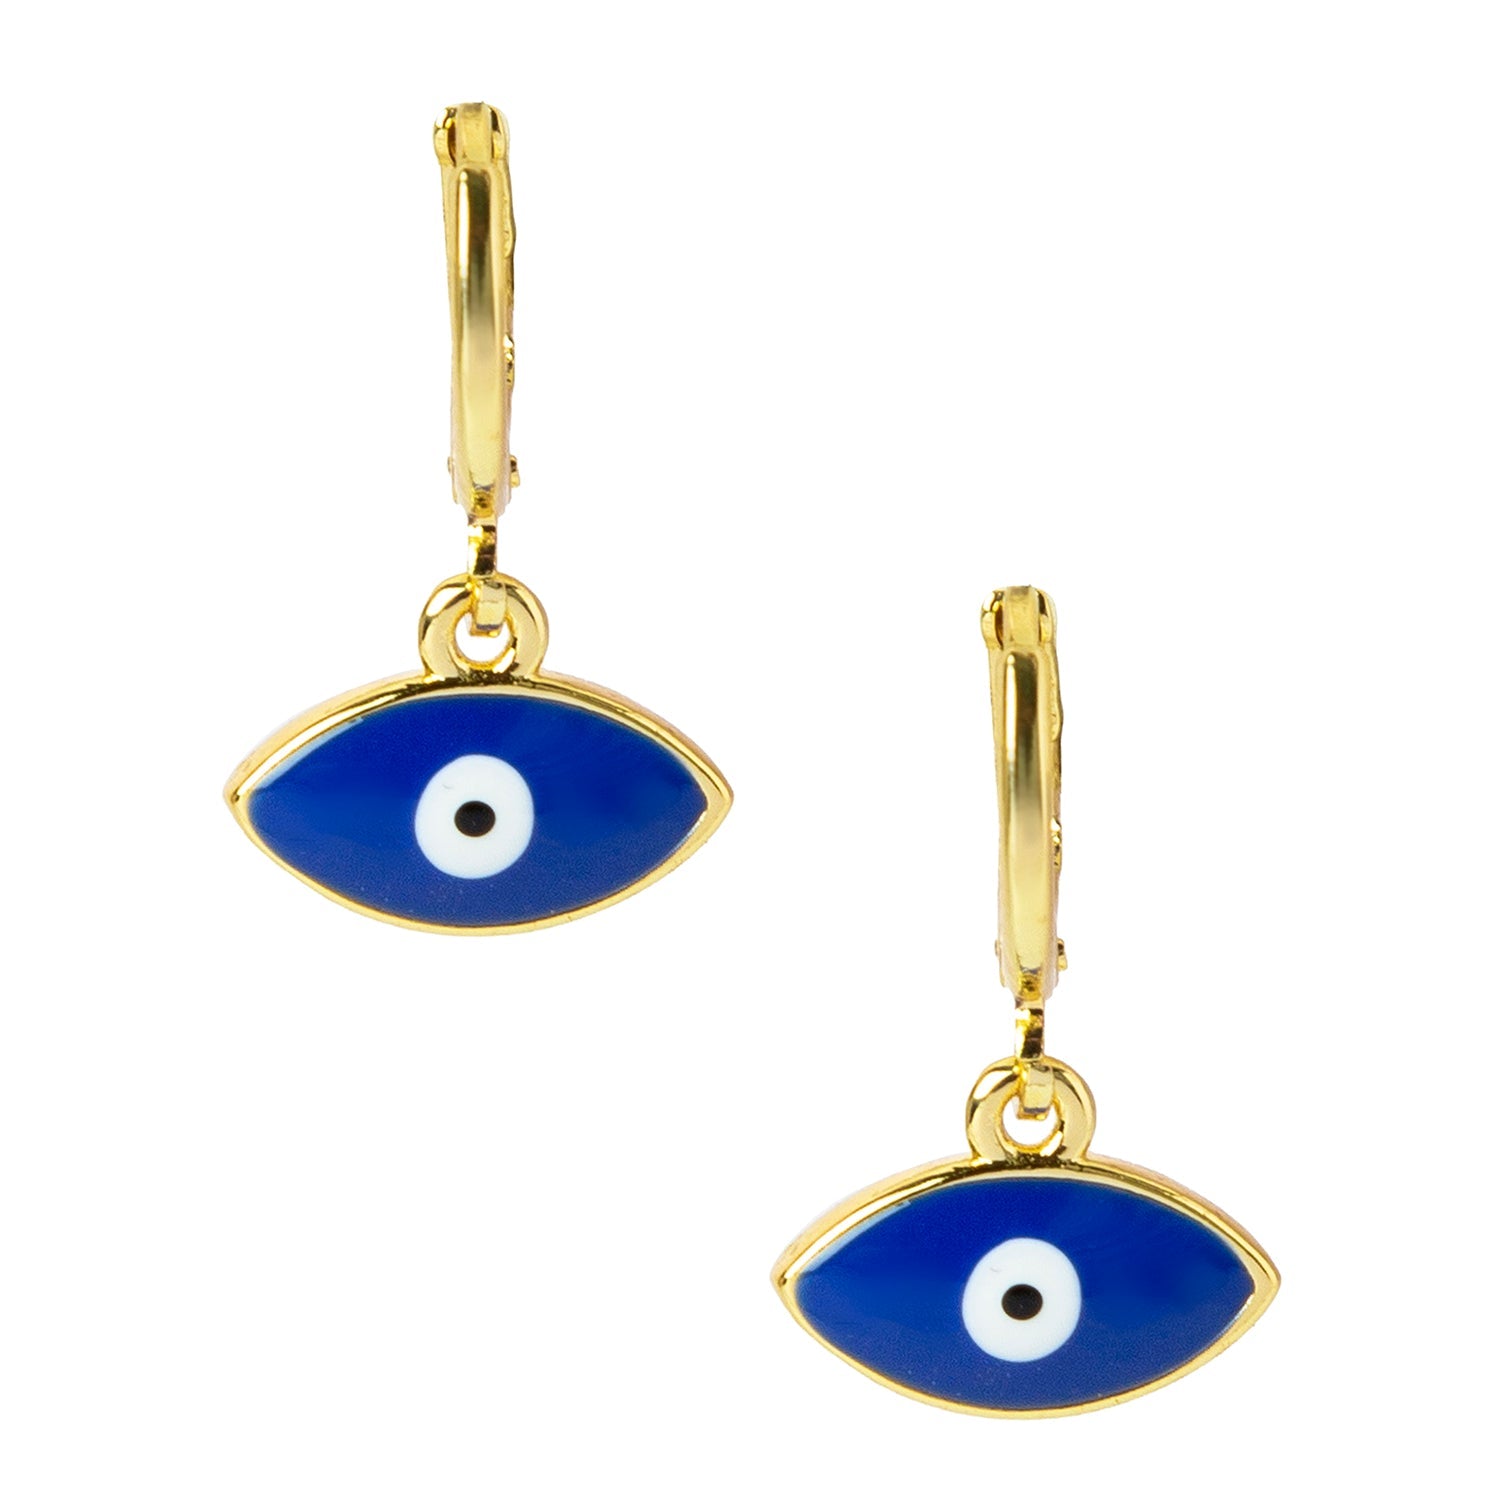 sterling silver jewellery york Sterling Silver Evil Eye Hoop earrings with  Blue Enamel and Crystal (15mm Diameter) (E581) Sterling silver jewellery  range of Fashion and costume and body jewellery.